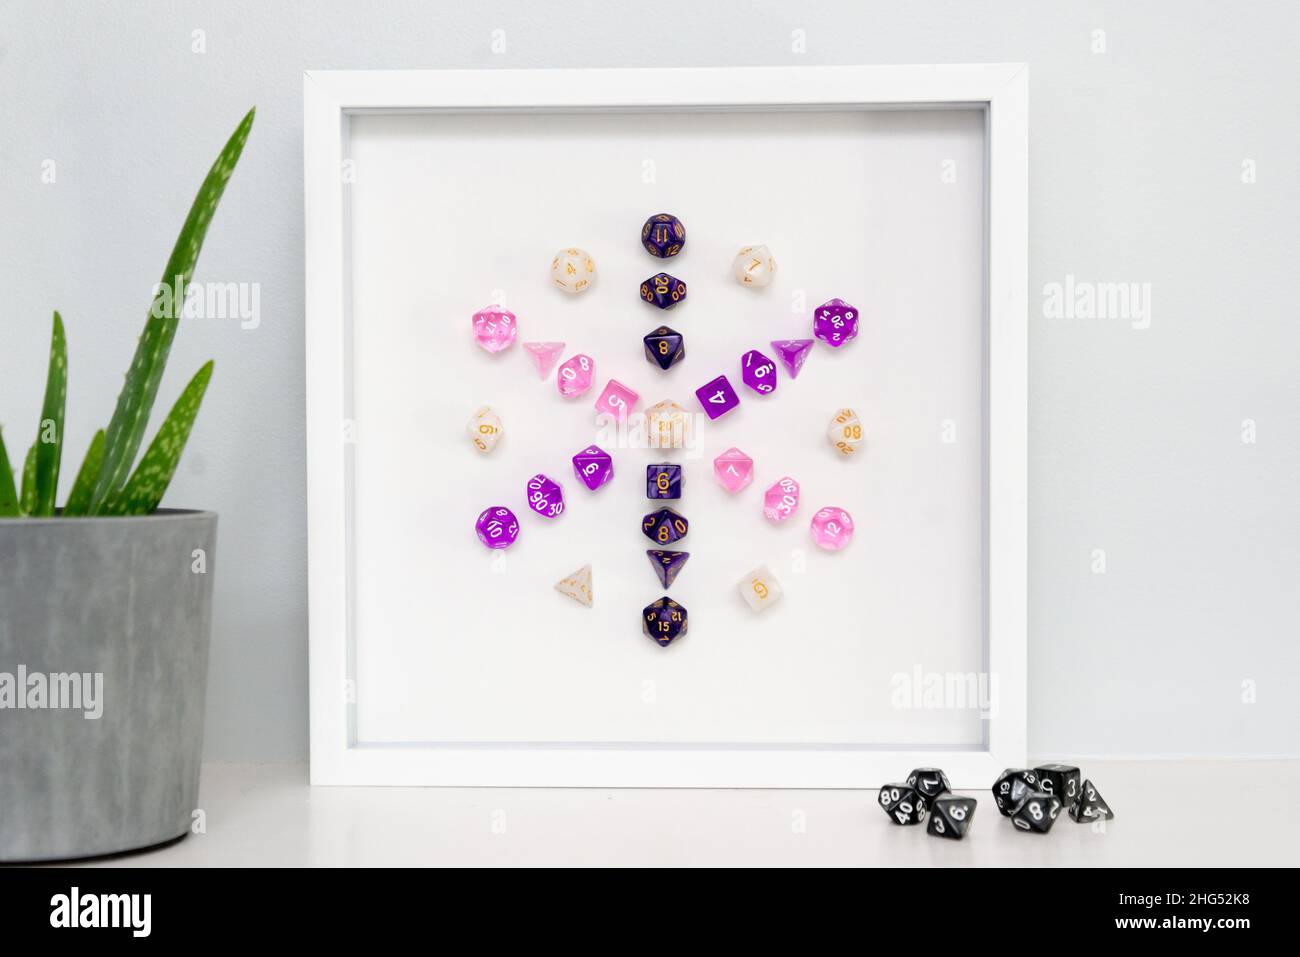 A framed piece of minimalist mixed-media art: a dice mandala created with colorful polyhedral dice used for role playing games like D&D. Stock Photo